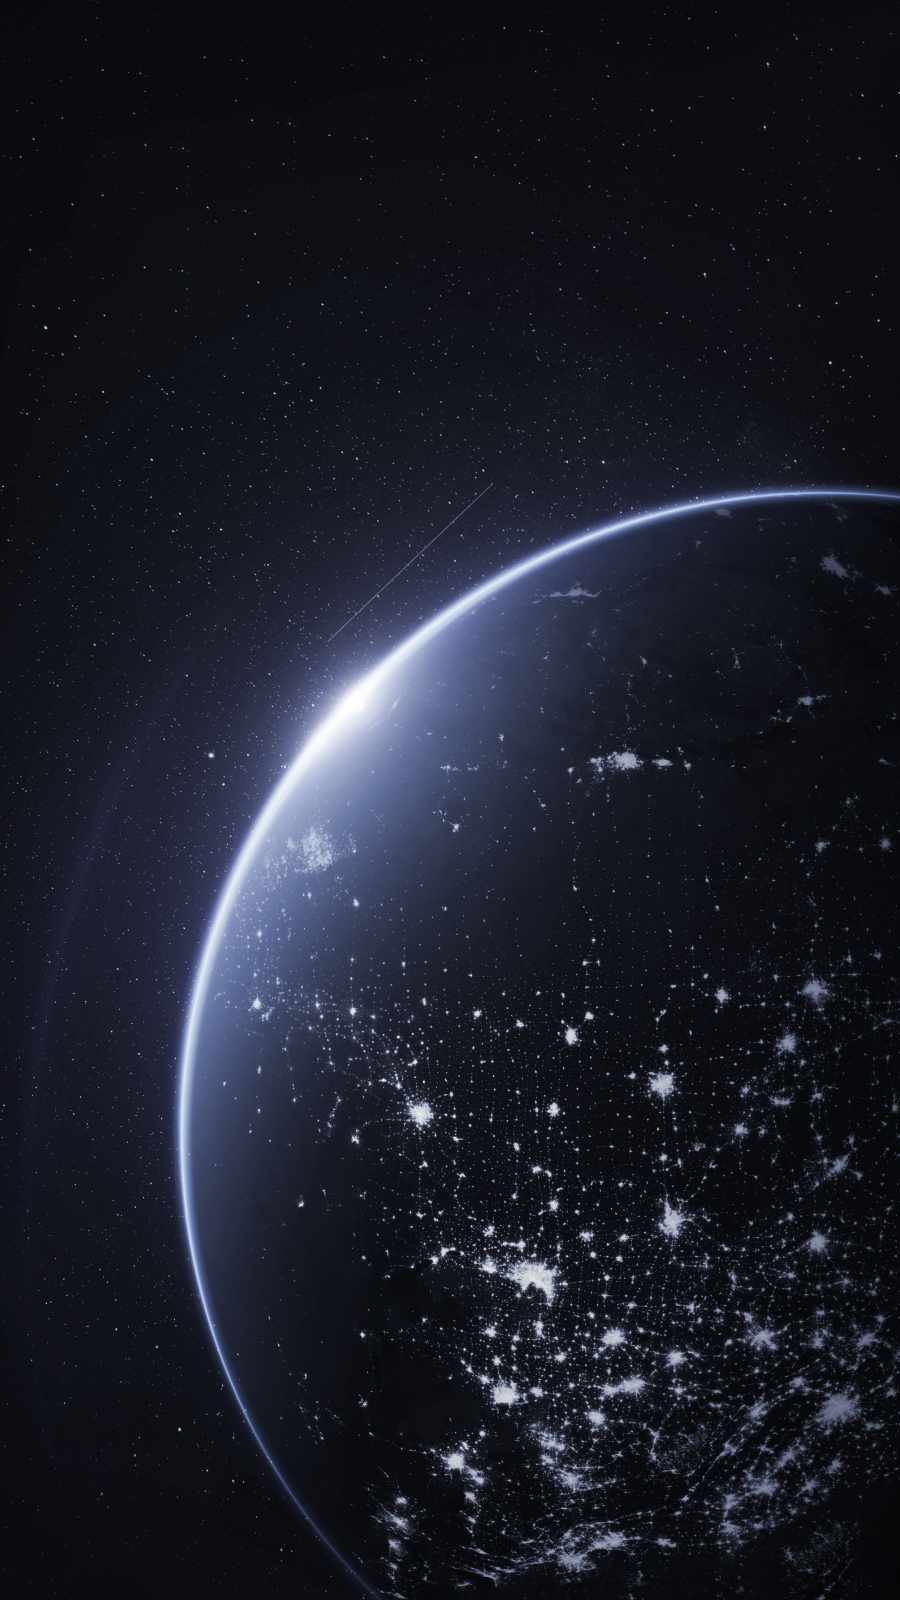 Earth View In Night - IPhone Wallpapers : iPhone Wallpapers